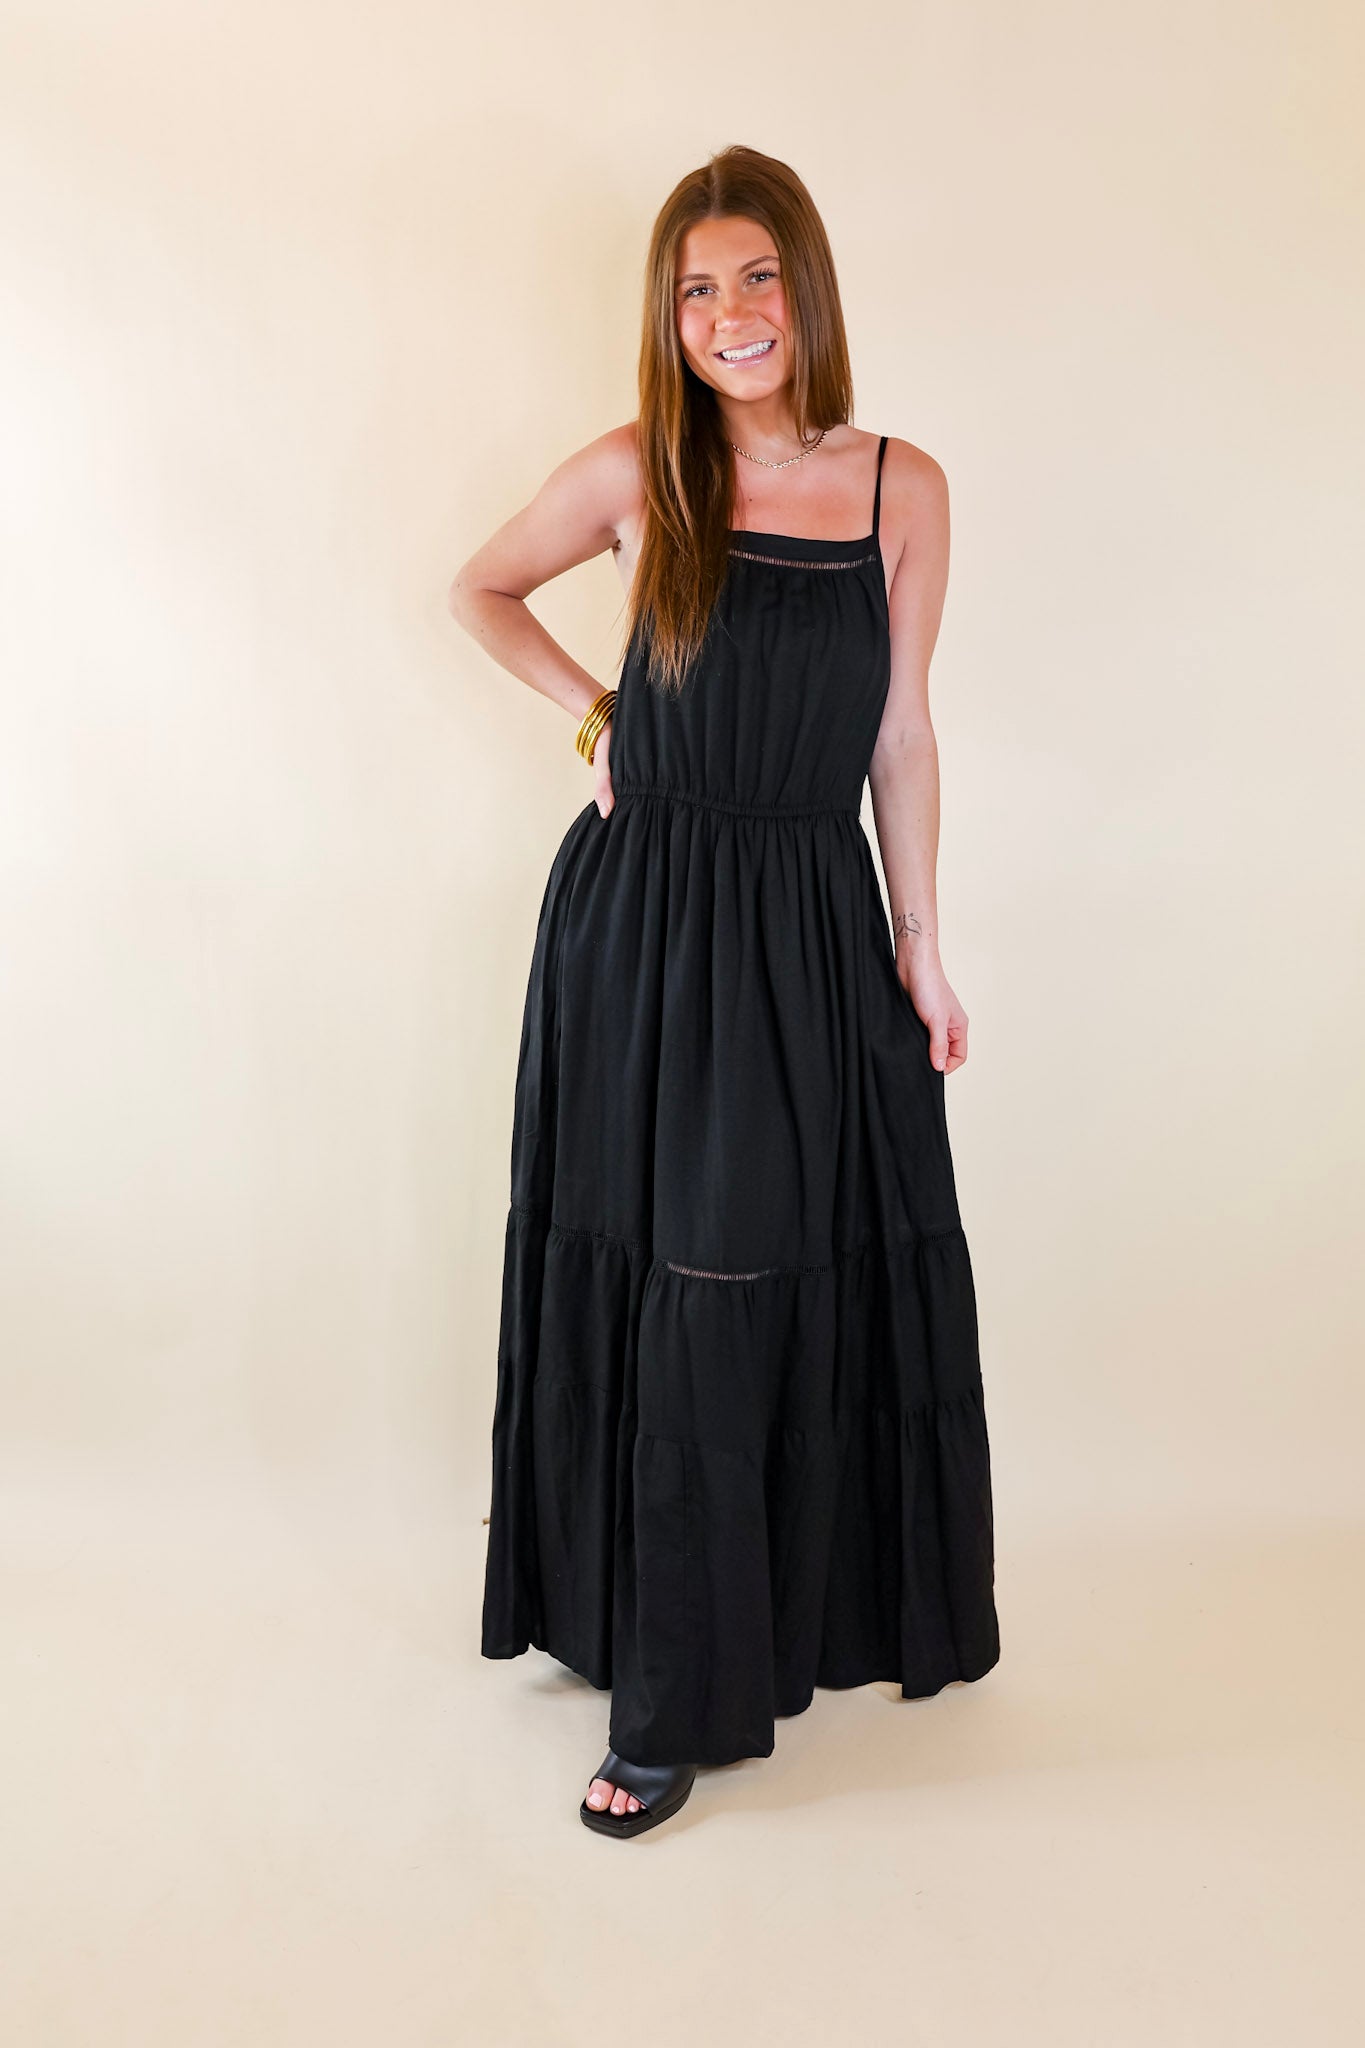 Tranquil Tides Tiered Maxi Dress in Black - Giddy Up Glamour Boutique